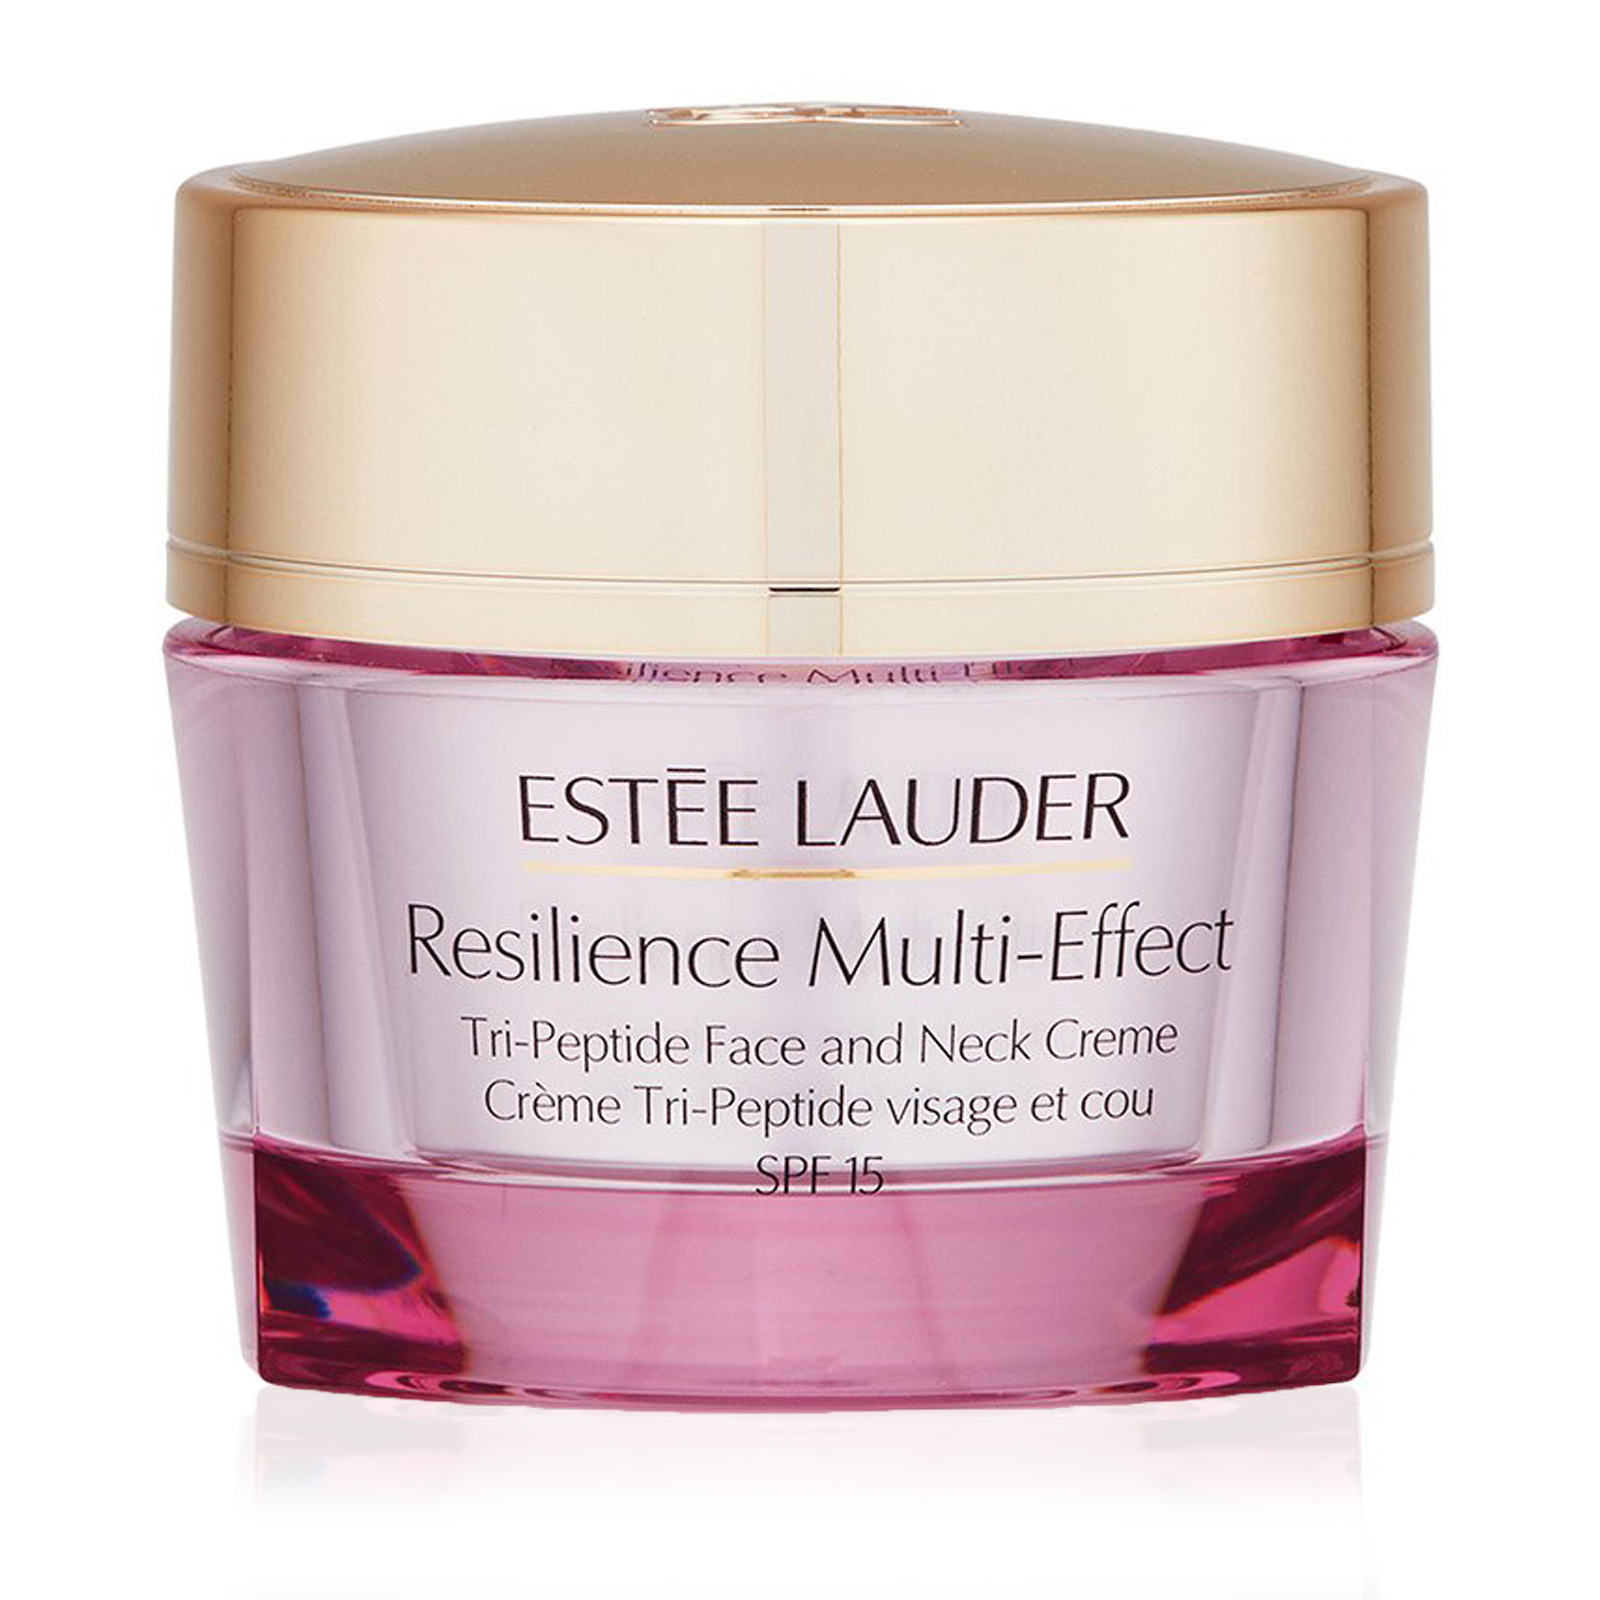 Resilience Multi-Effect Tri-Peptide Face and Neck Creme SPF 15 (Dry Skin)